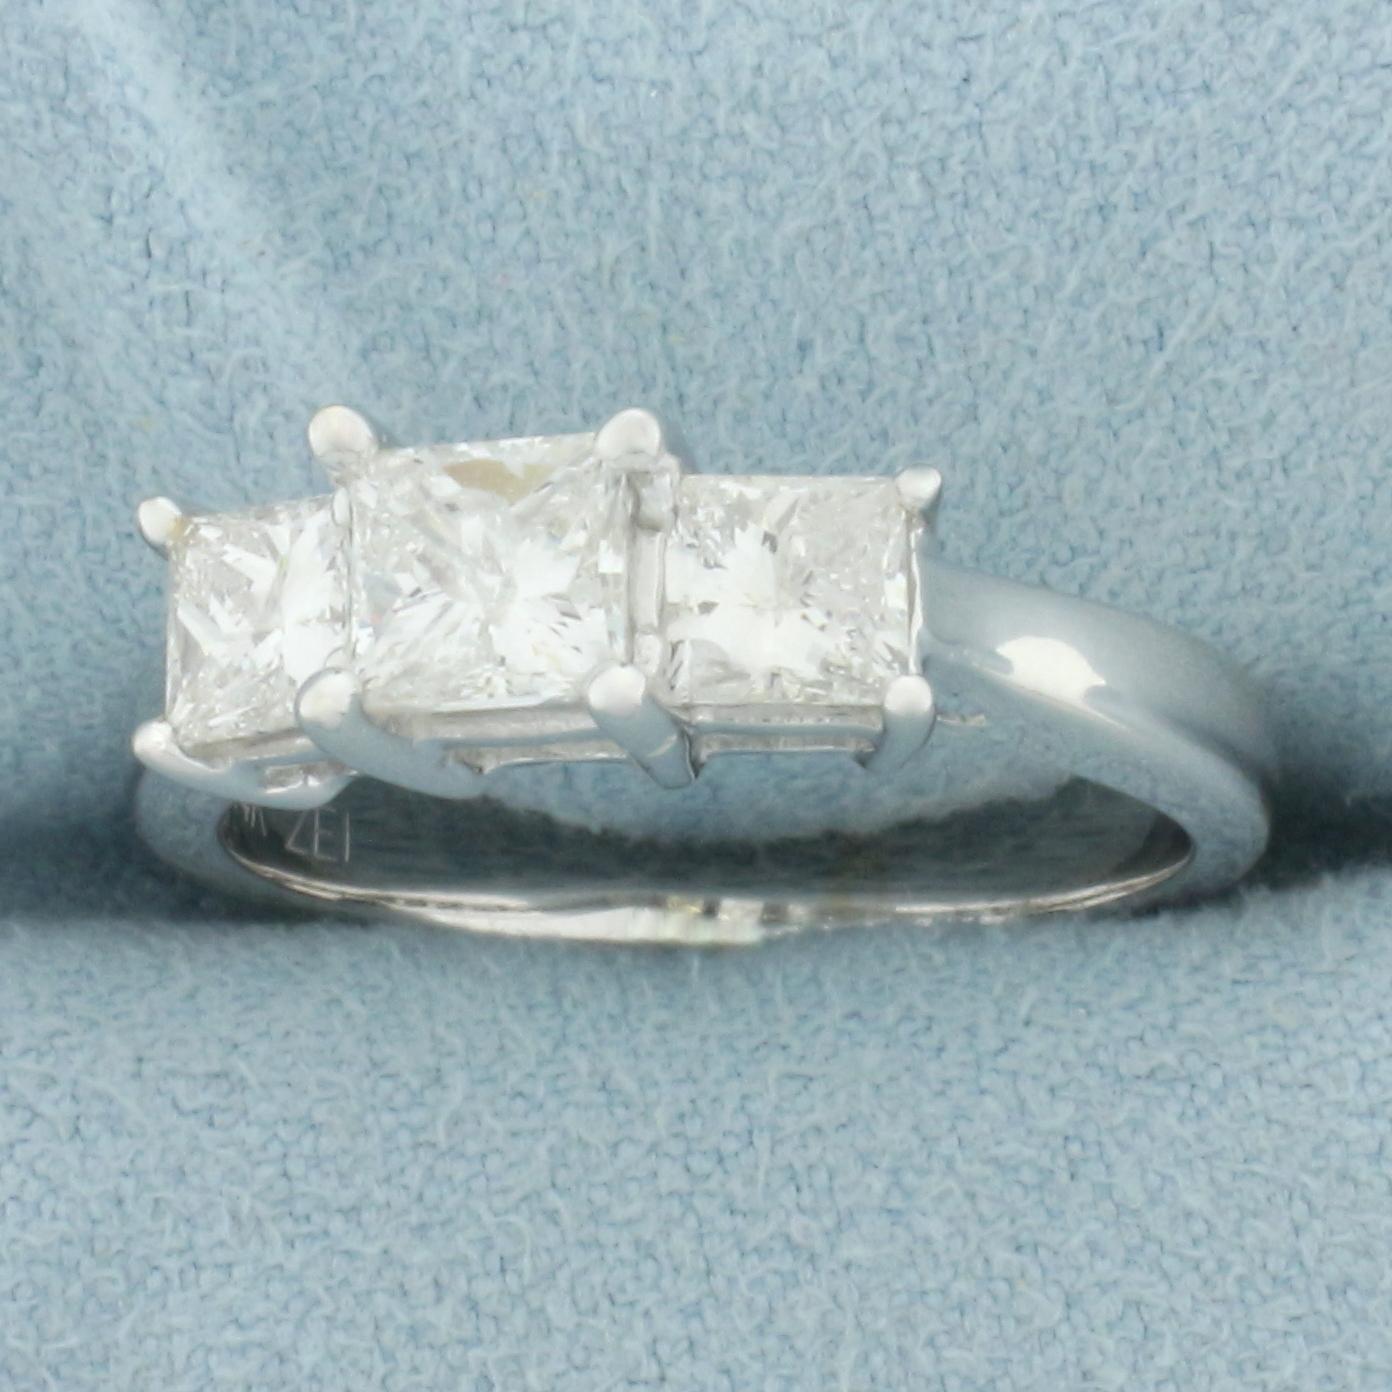 Princess Cut 3 Stone Engagement Or Anniversary Ring In 14k White Gold